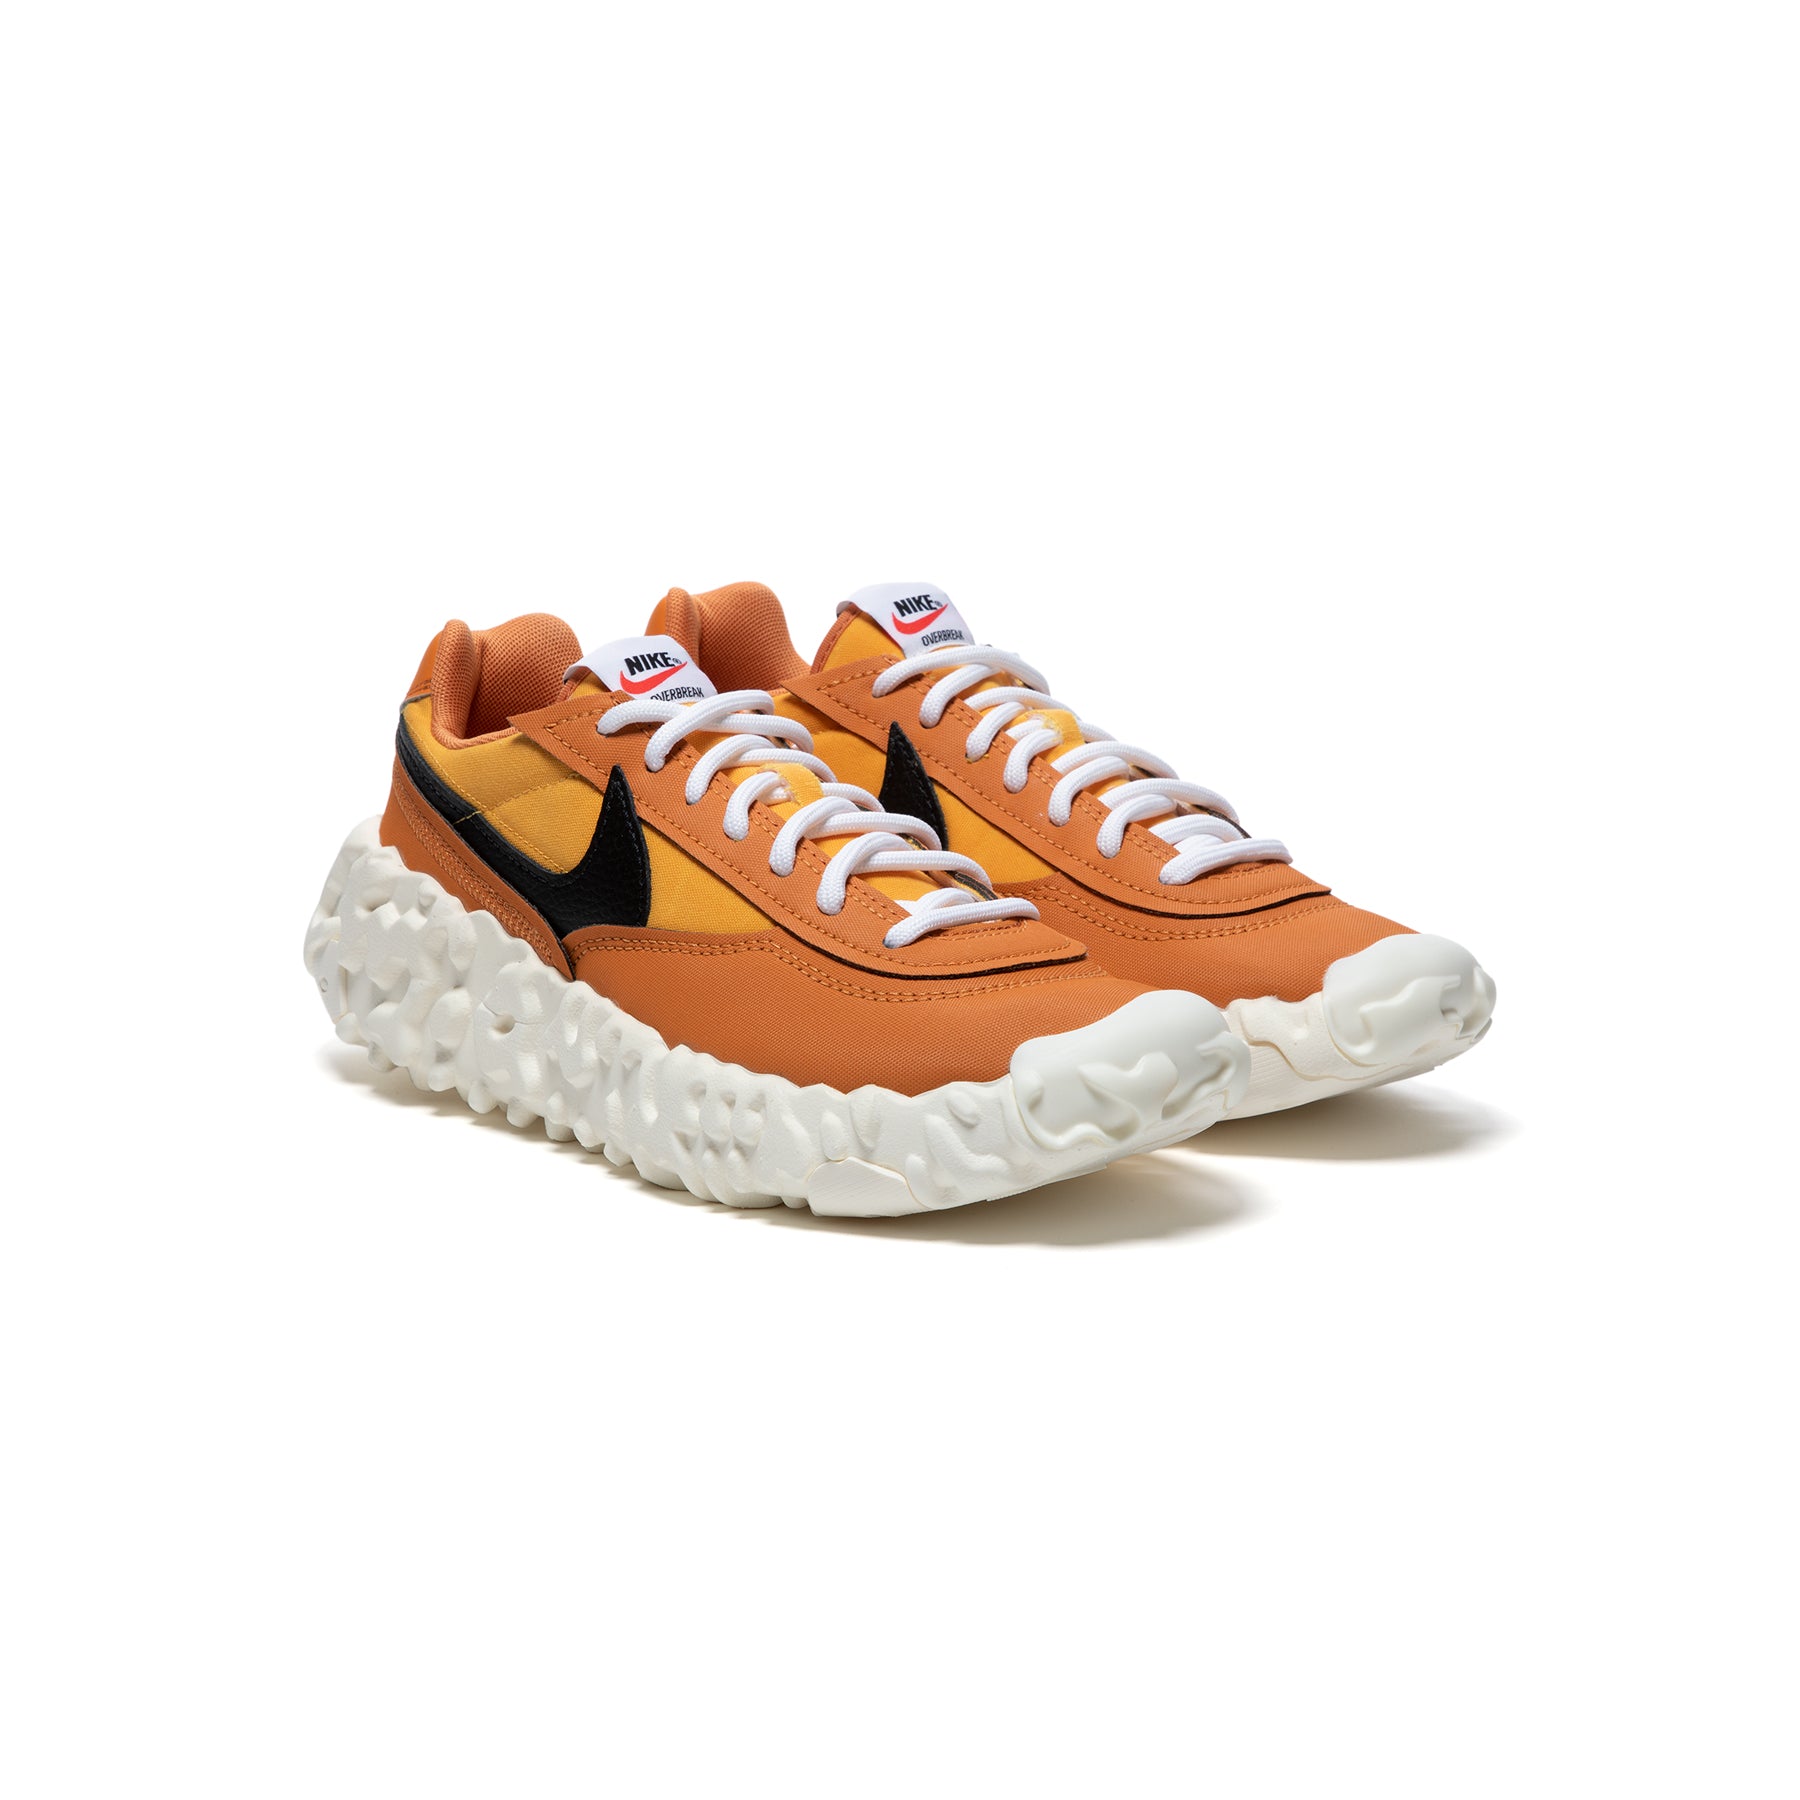 Nike Overbreak (Hot Curry/Black/Pollen/Sail) – Concepts